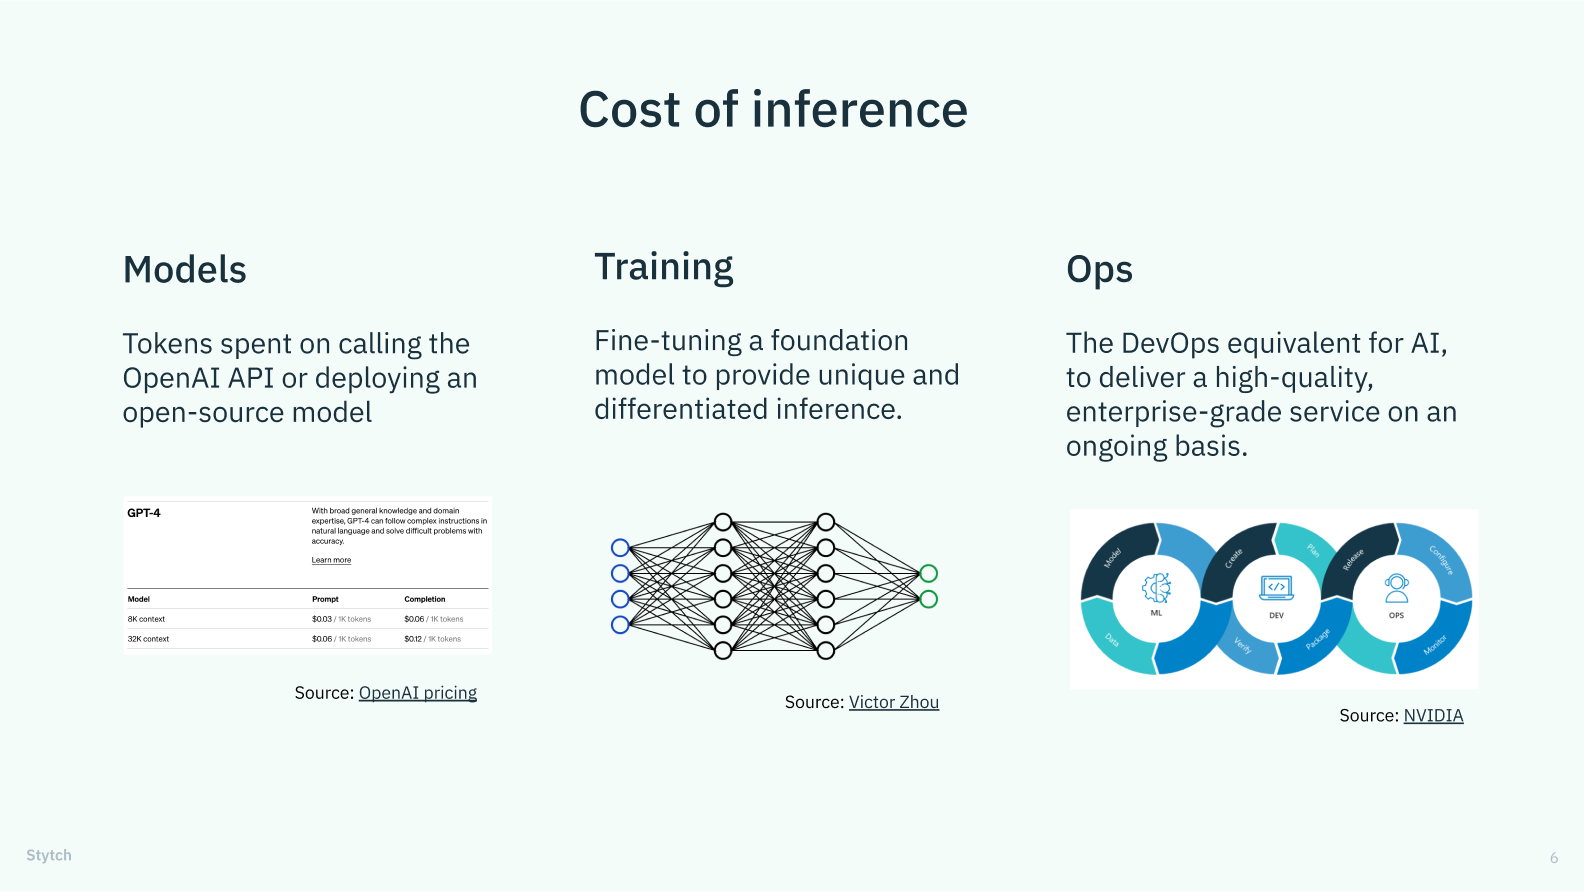 A diagram of the different costs of inference for AI applications: - Models: Tokens spent on calling the OpenAI API or deploying an open-source model - Training: Fine-tuning a foundation model to provide unique and differentiated inference - Ops: The DevOps equivalent for AI, to deliver a high-quality, enterprise-grade service on an ongoing basis.